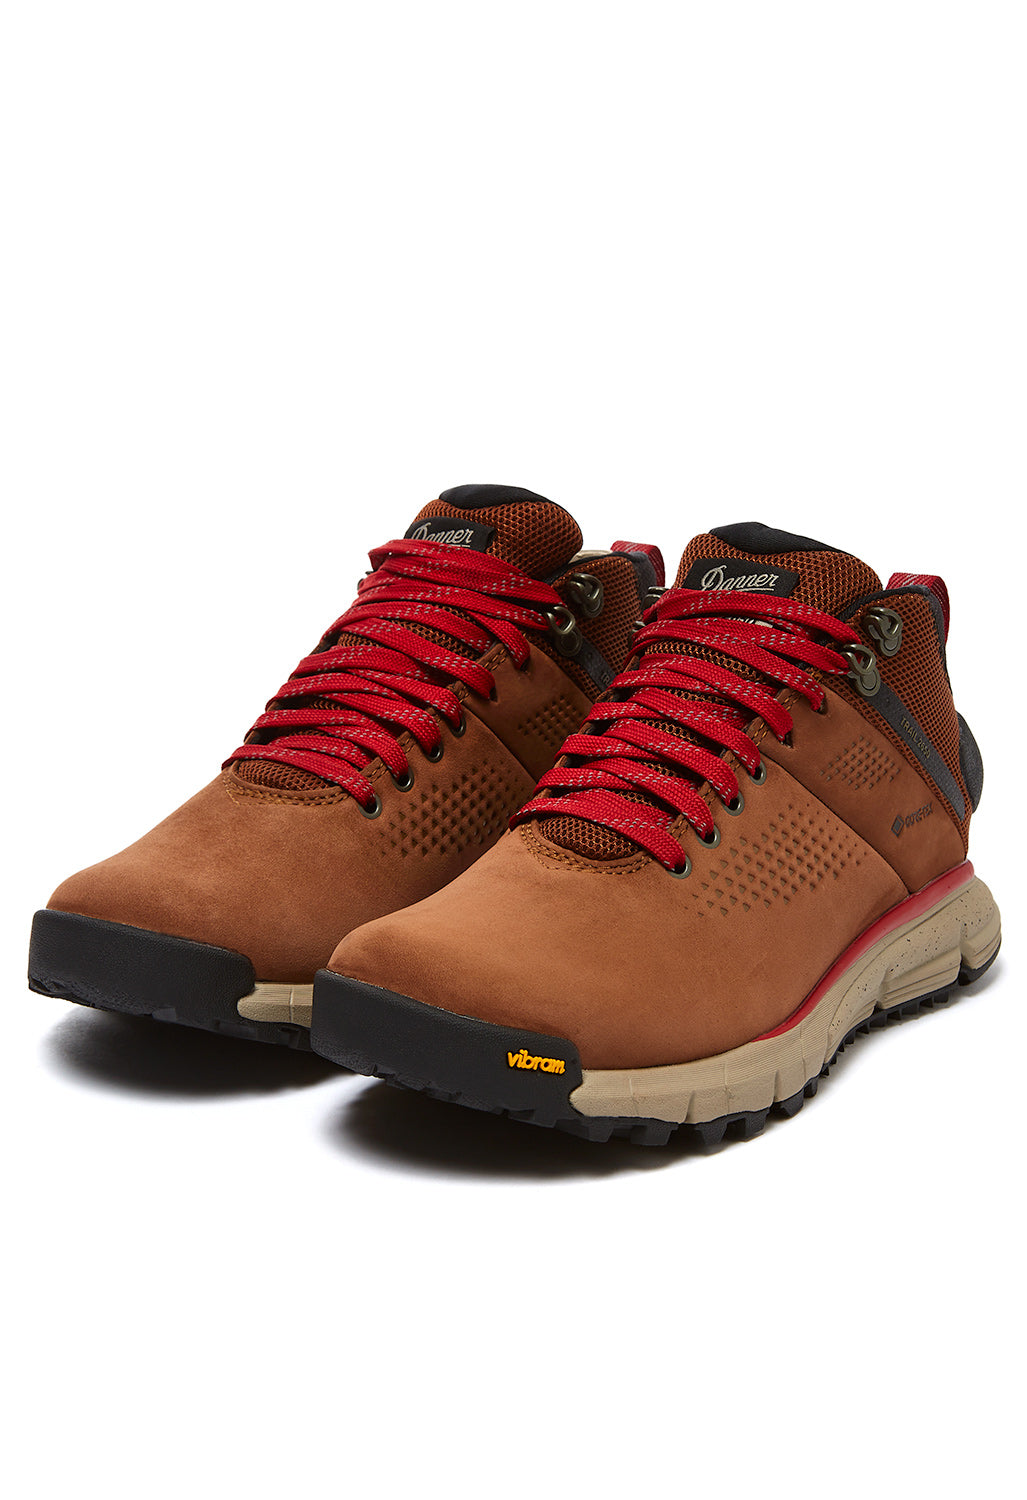 Danner Trail 2650 Mid GORE-TEX Women's Boots - Brown/Red